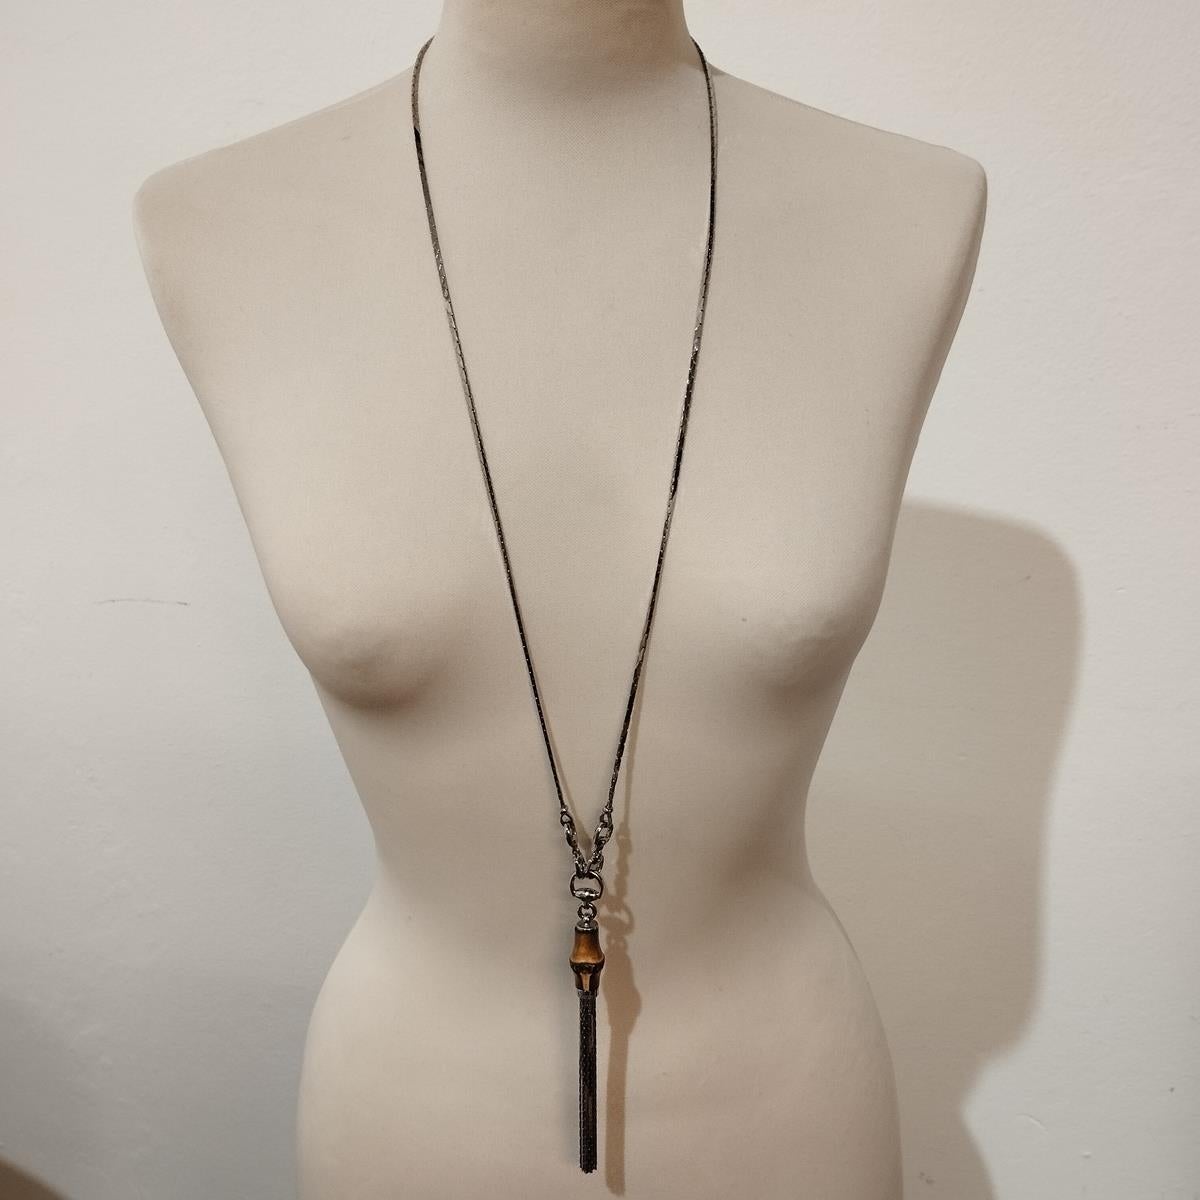 Very chic and iconic Gucci long necklace
925 Silver 
Bamboo
Cobra necklace
Lenght cm 80 (31,2 inches)
With pouch
Worldwide express shipping included in the price 